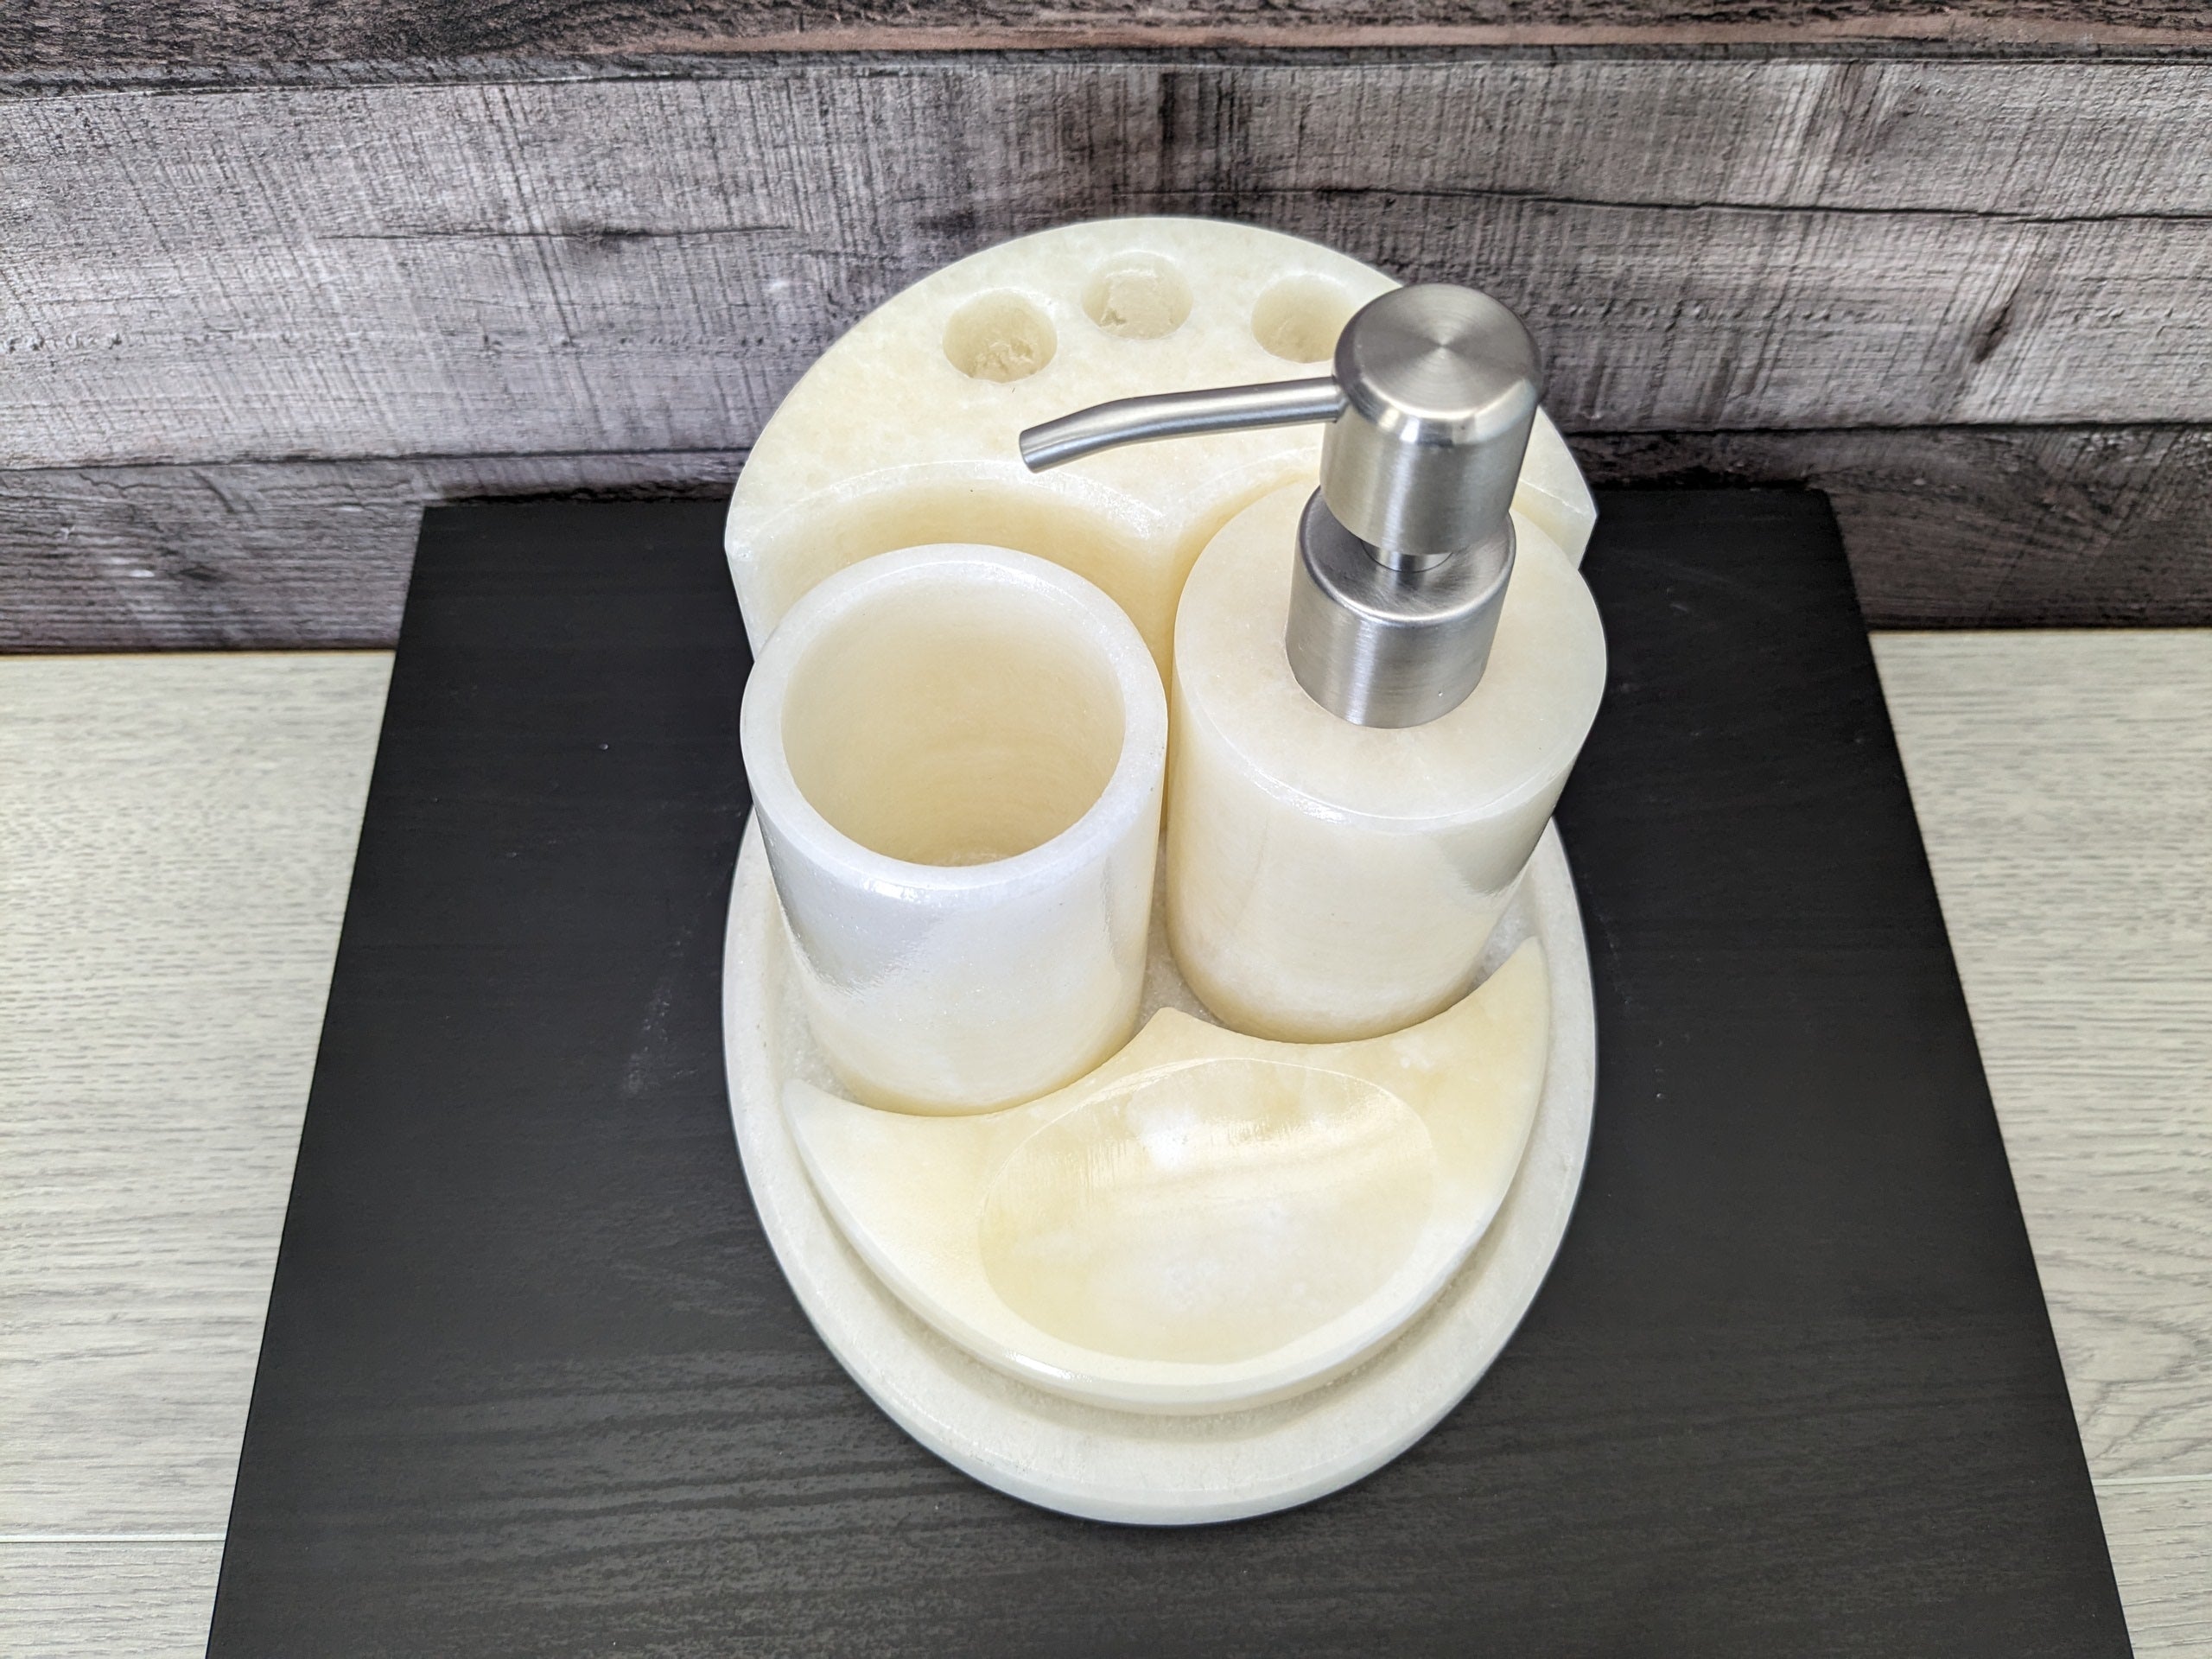 Ivory Onyx Bathroom Accessory Set. Handmade in Mexico. We package and ship from the USA. Buy now at www.felipeandgrace.com.